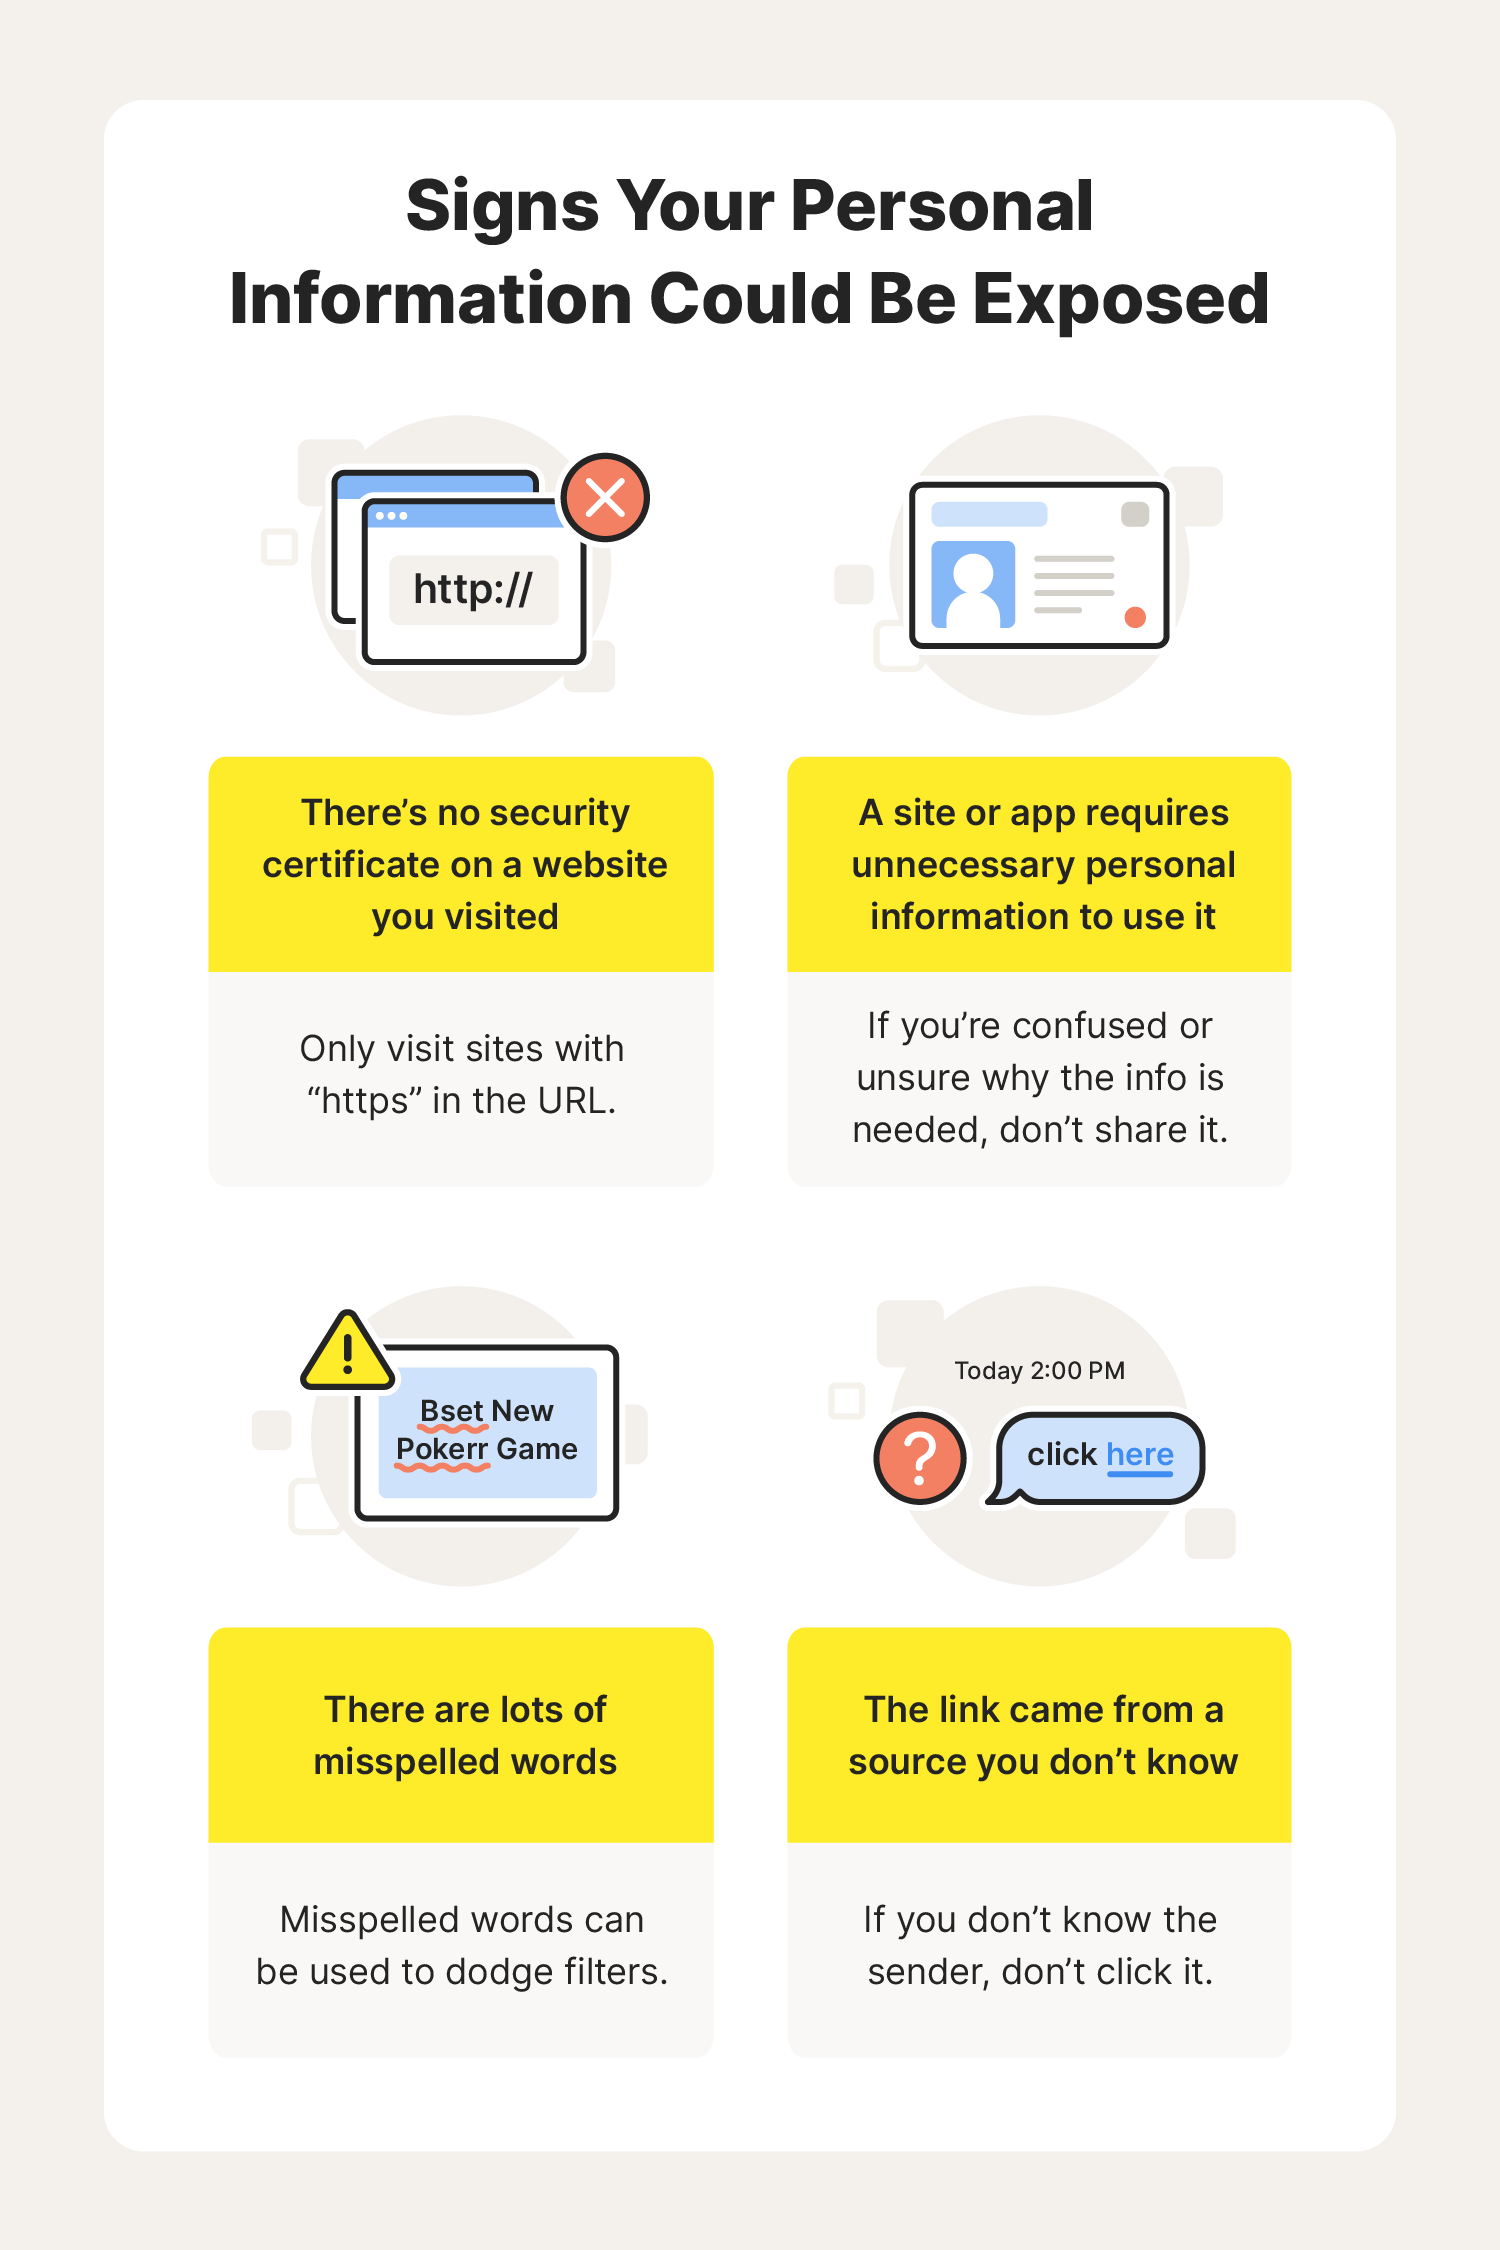 A graphic showcases warning signs that your information could be exposed, leading many to want to learn how to remove personal information from the internet